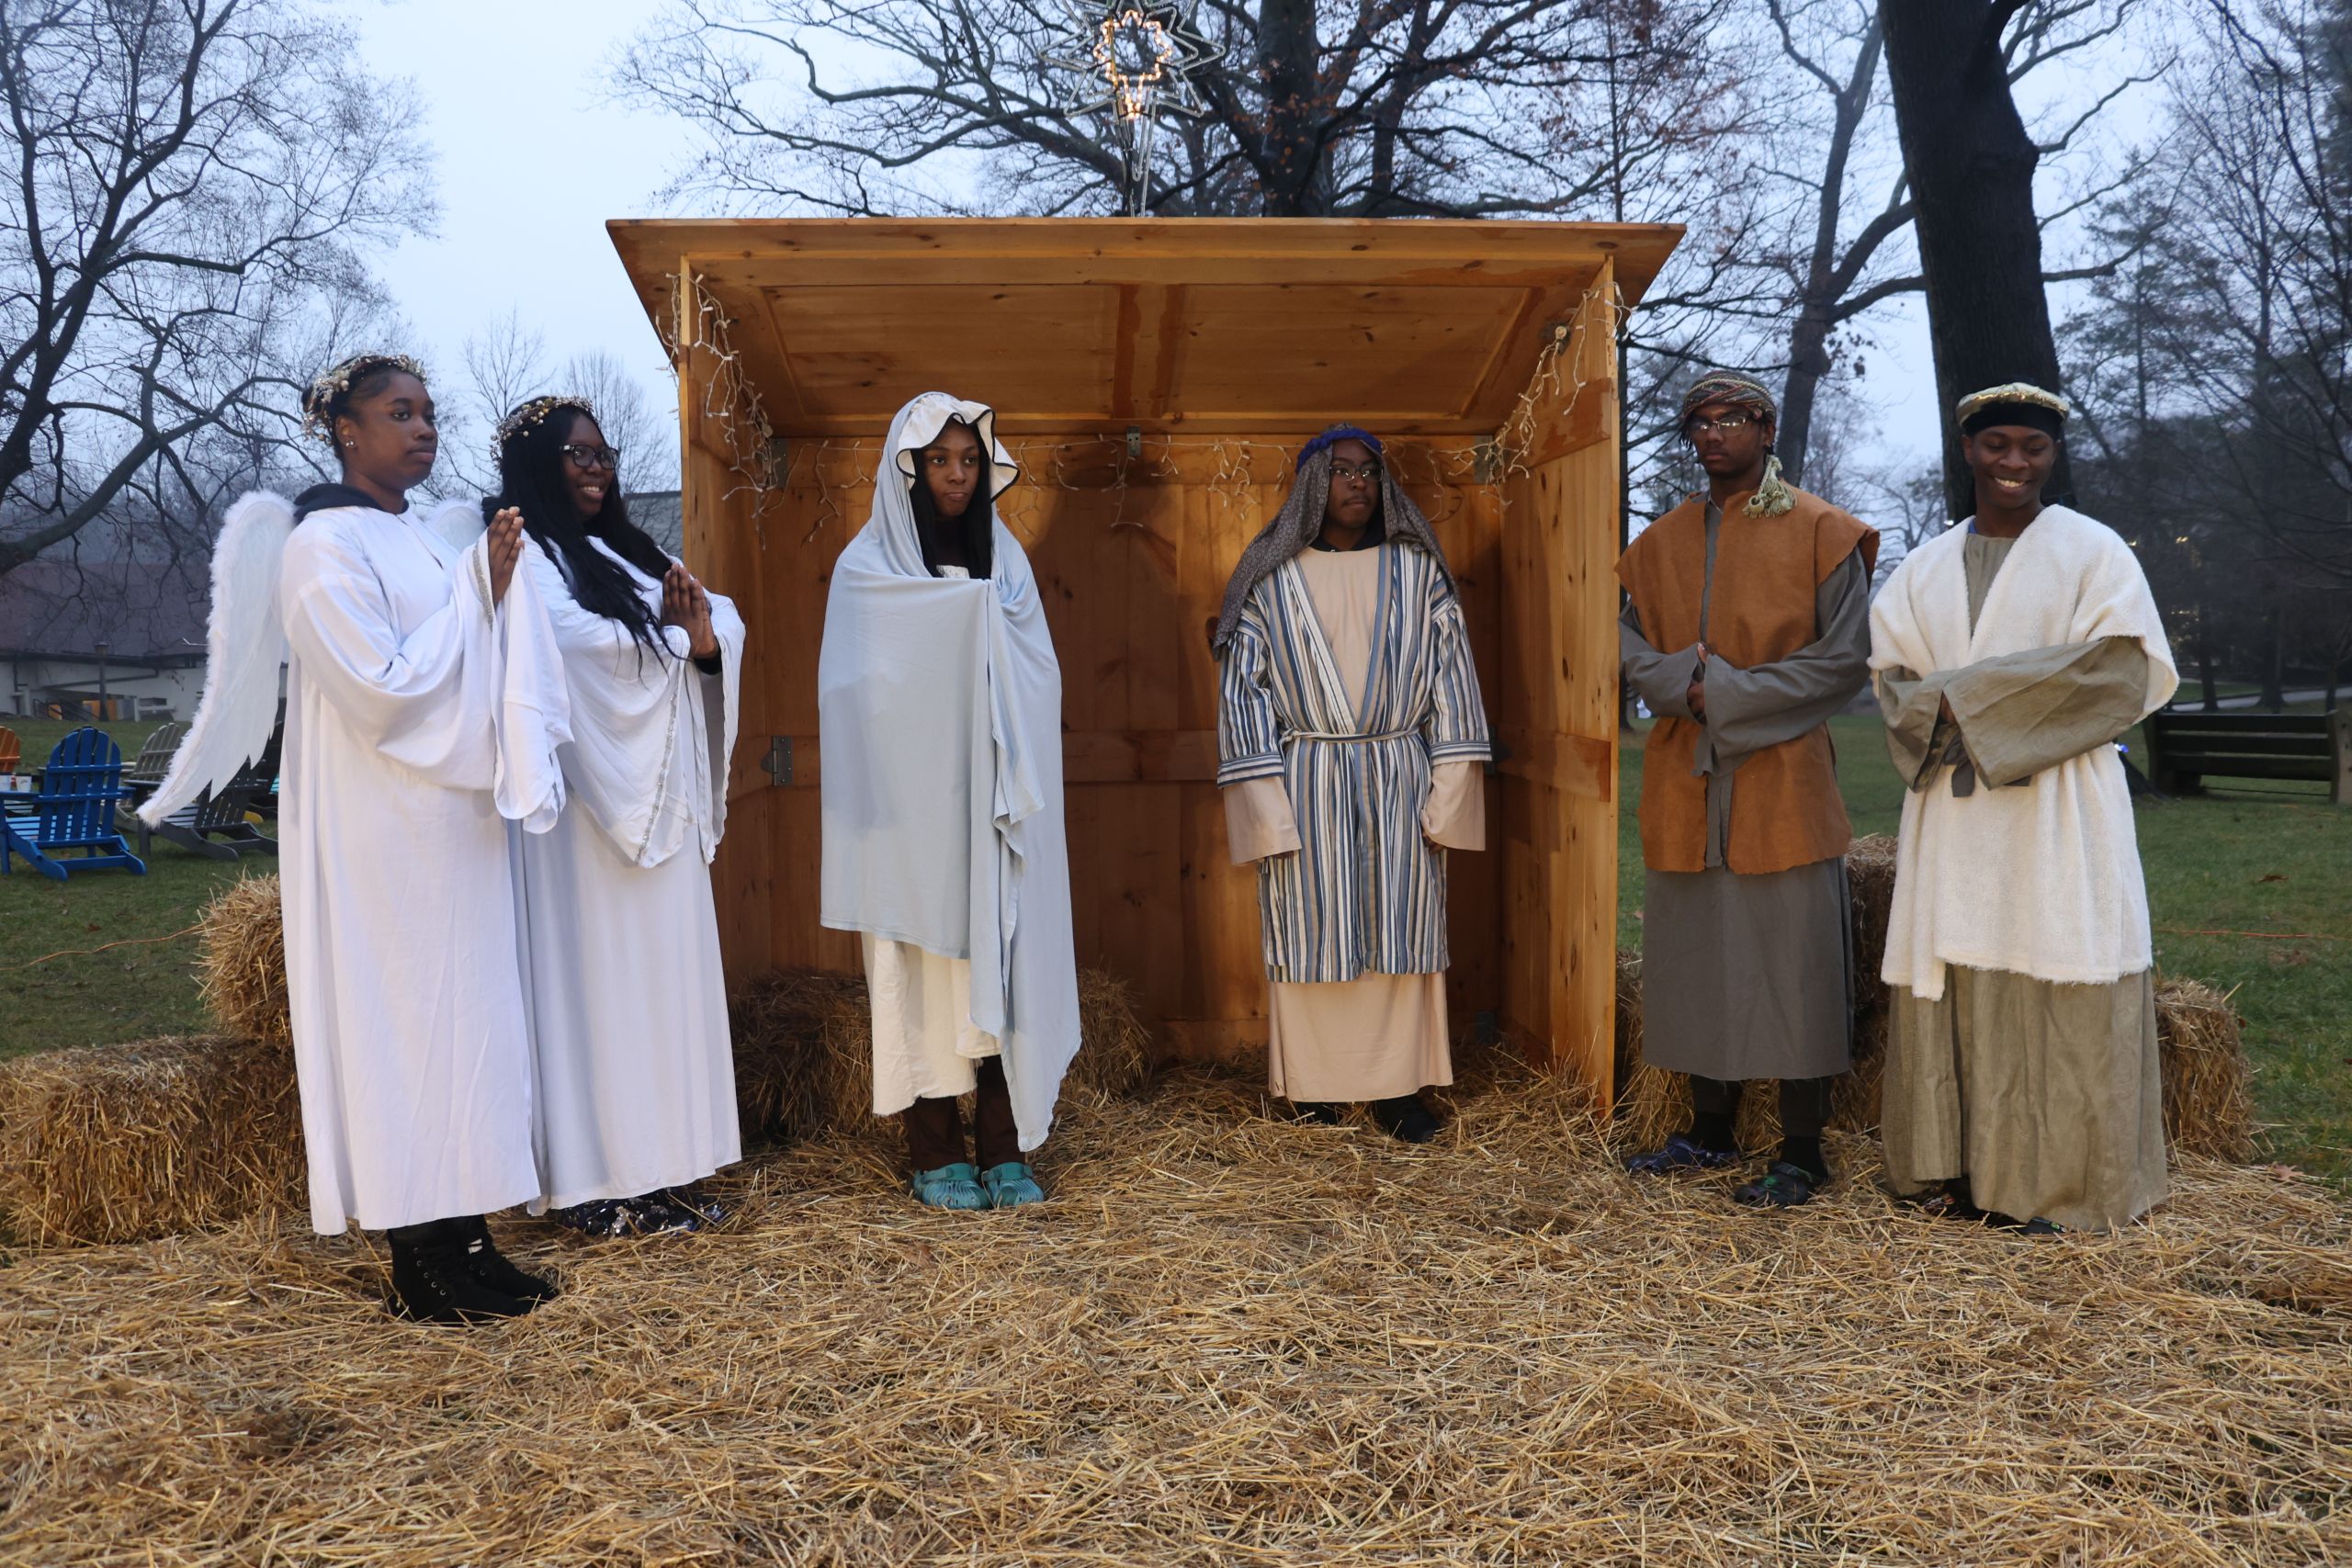 Campus Ministry students participating in the live nativity scene. Photo by John Doyle. 